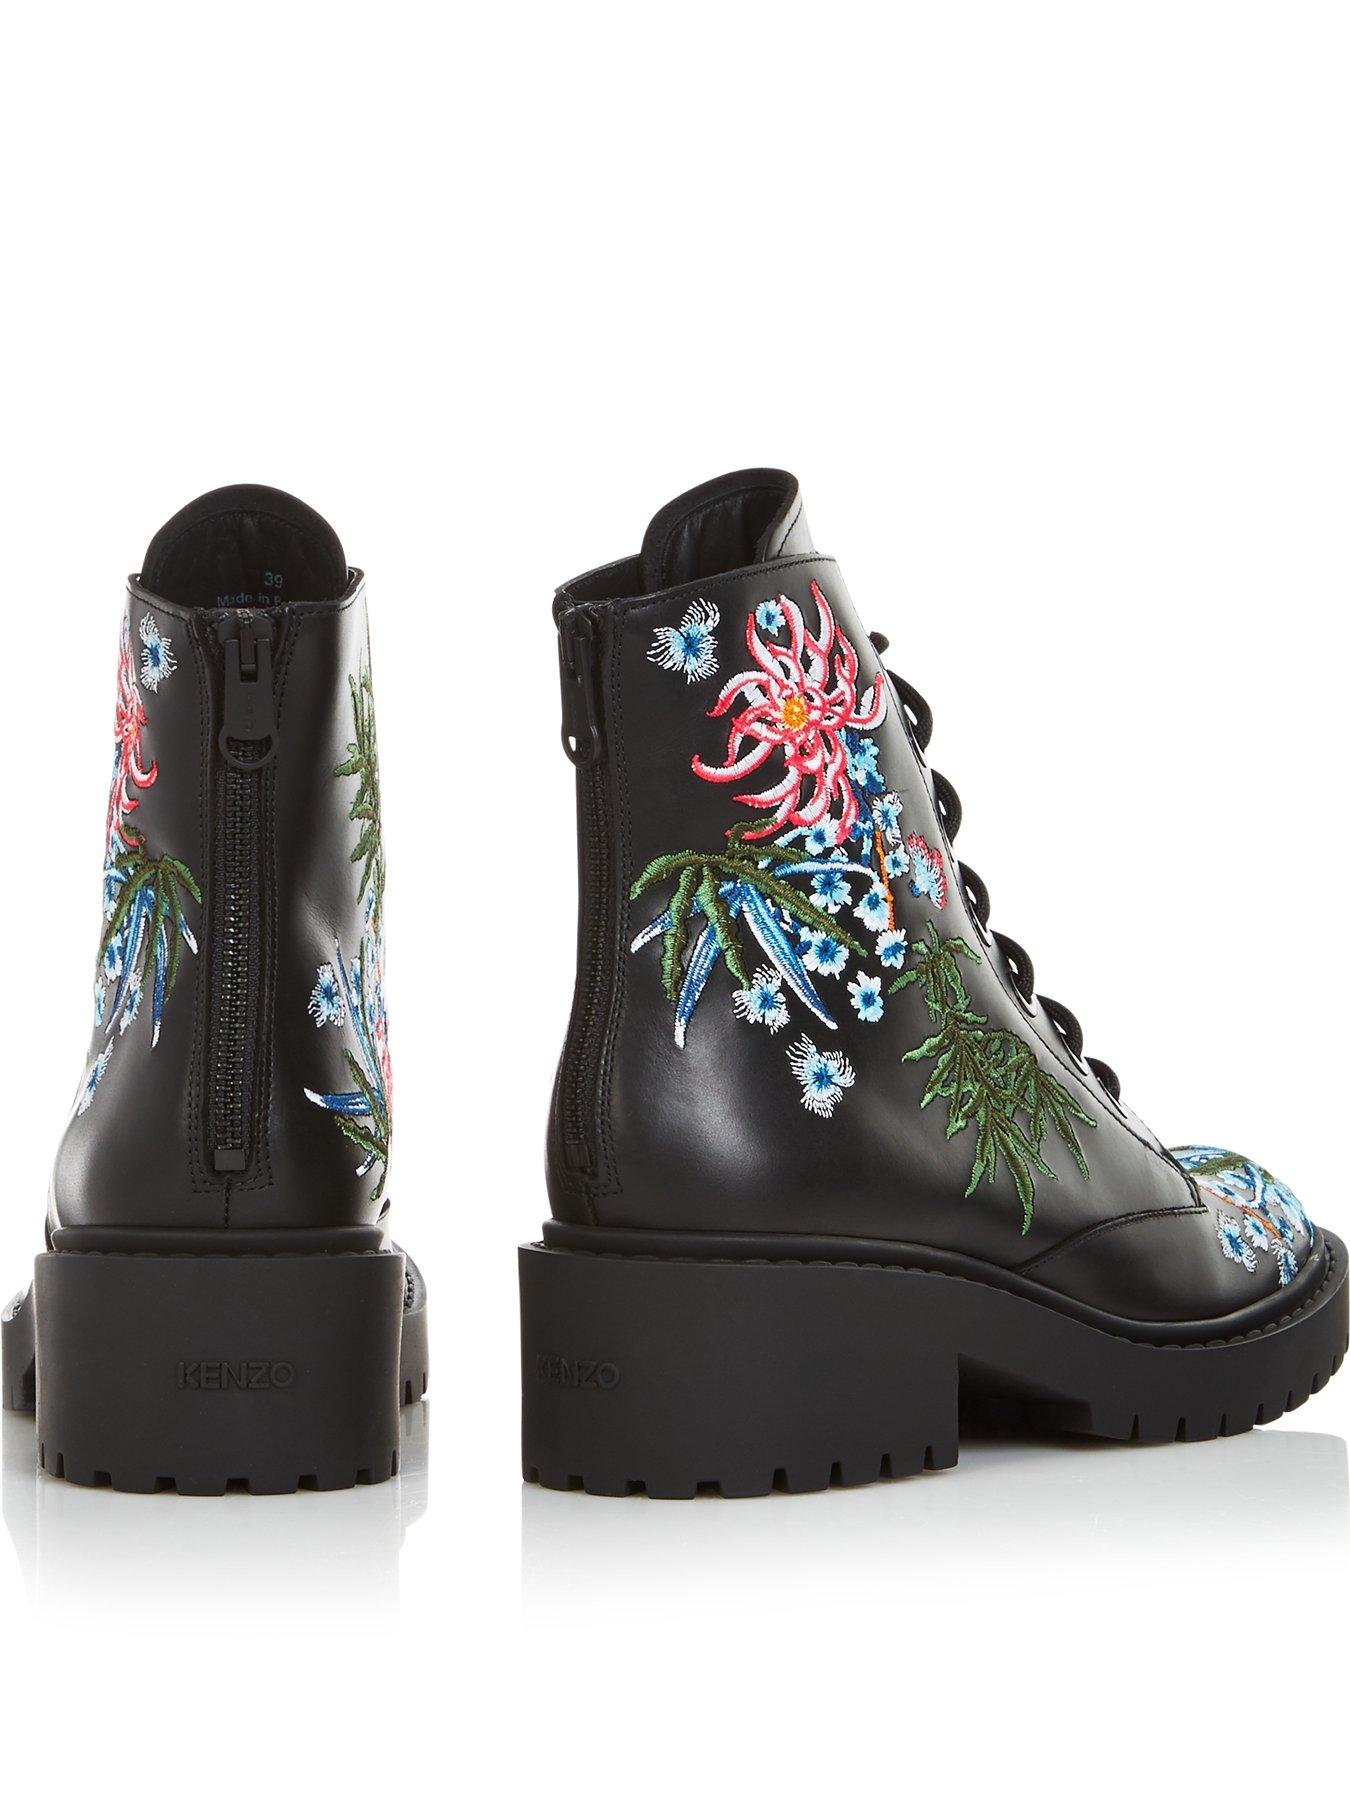 kenzo aftershave boots